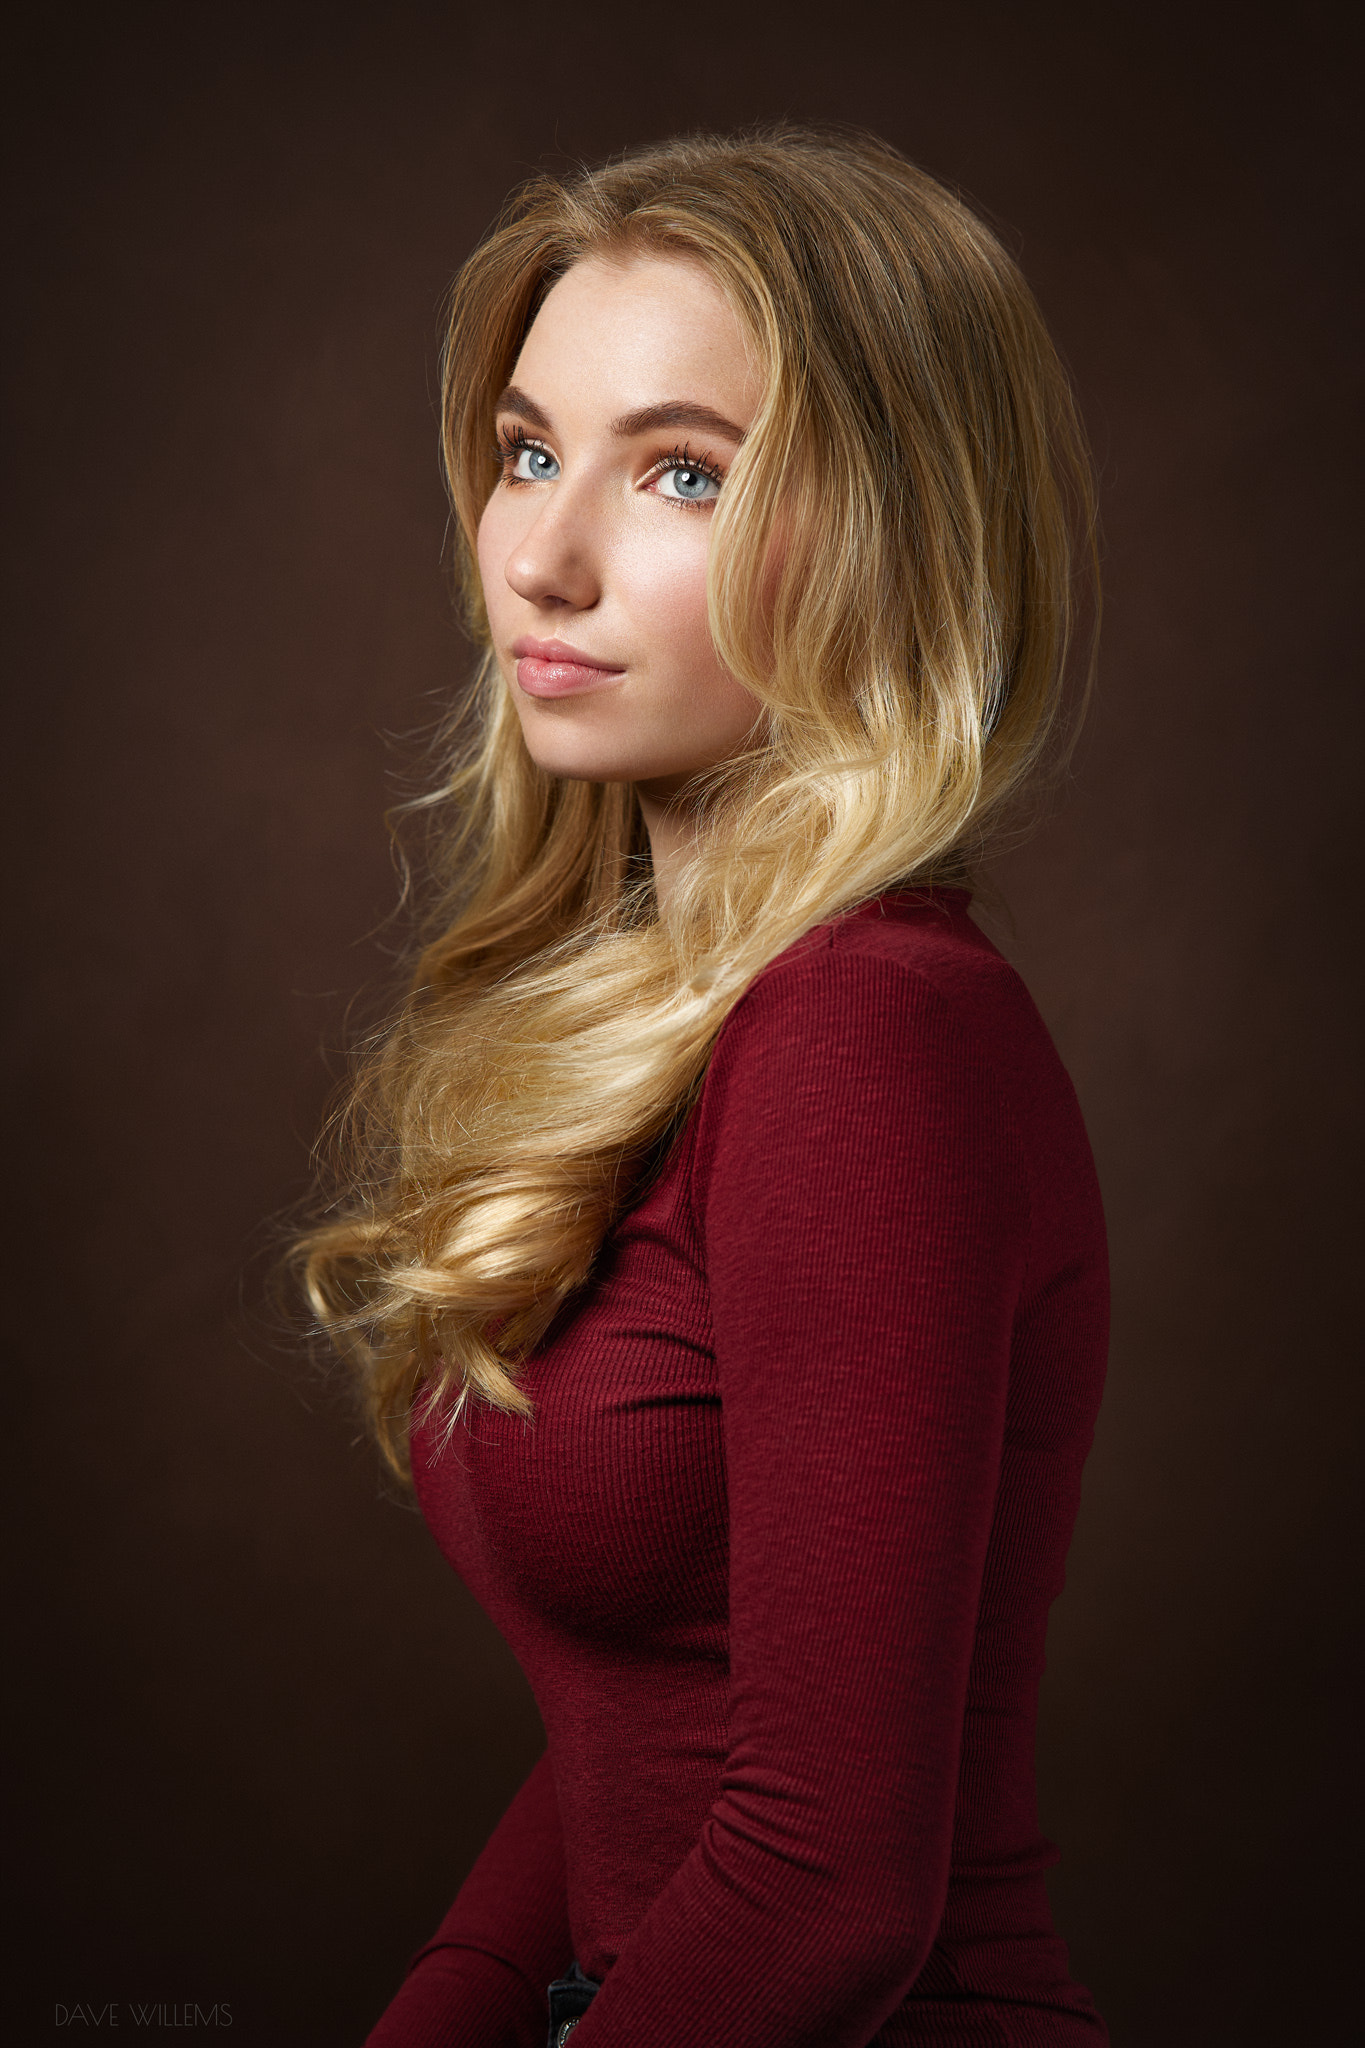 Dave Willems Women Blonde Long Hair Wavy Hair Looking Up Blouse Red Clothing Simple Background Gray  1365x2048